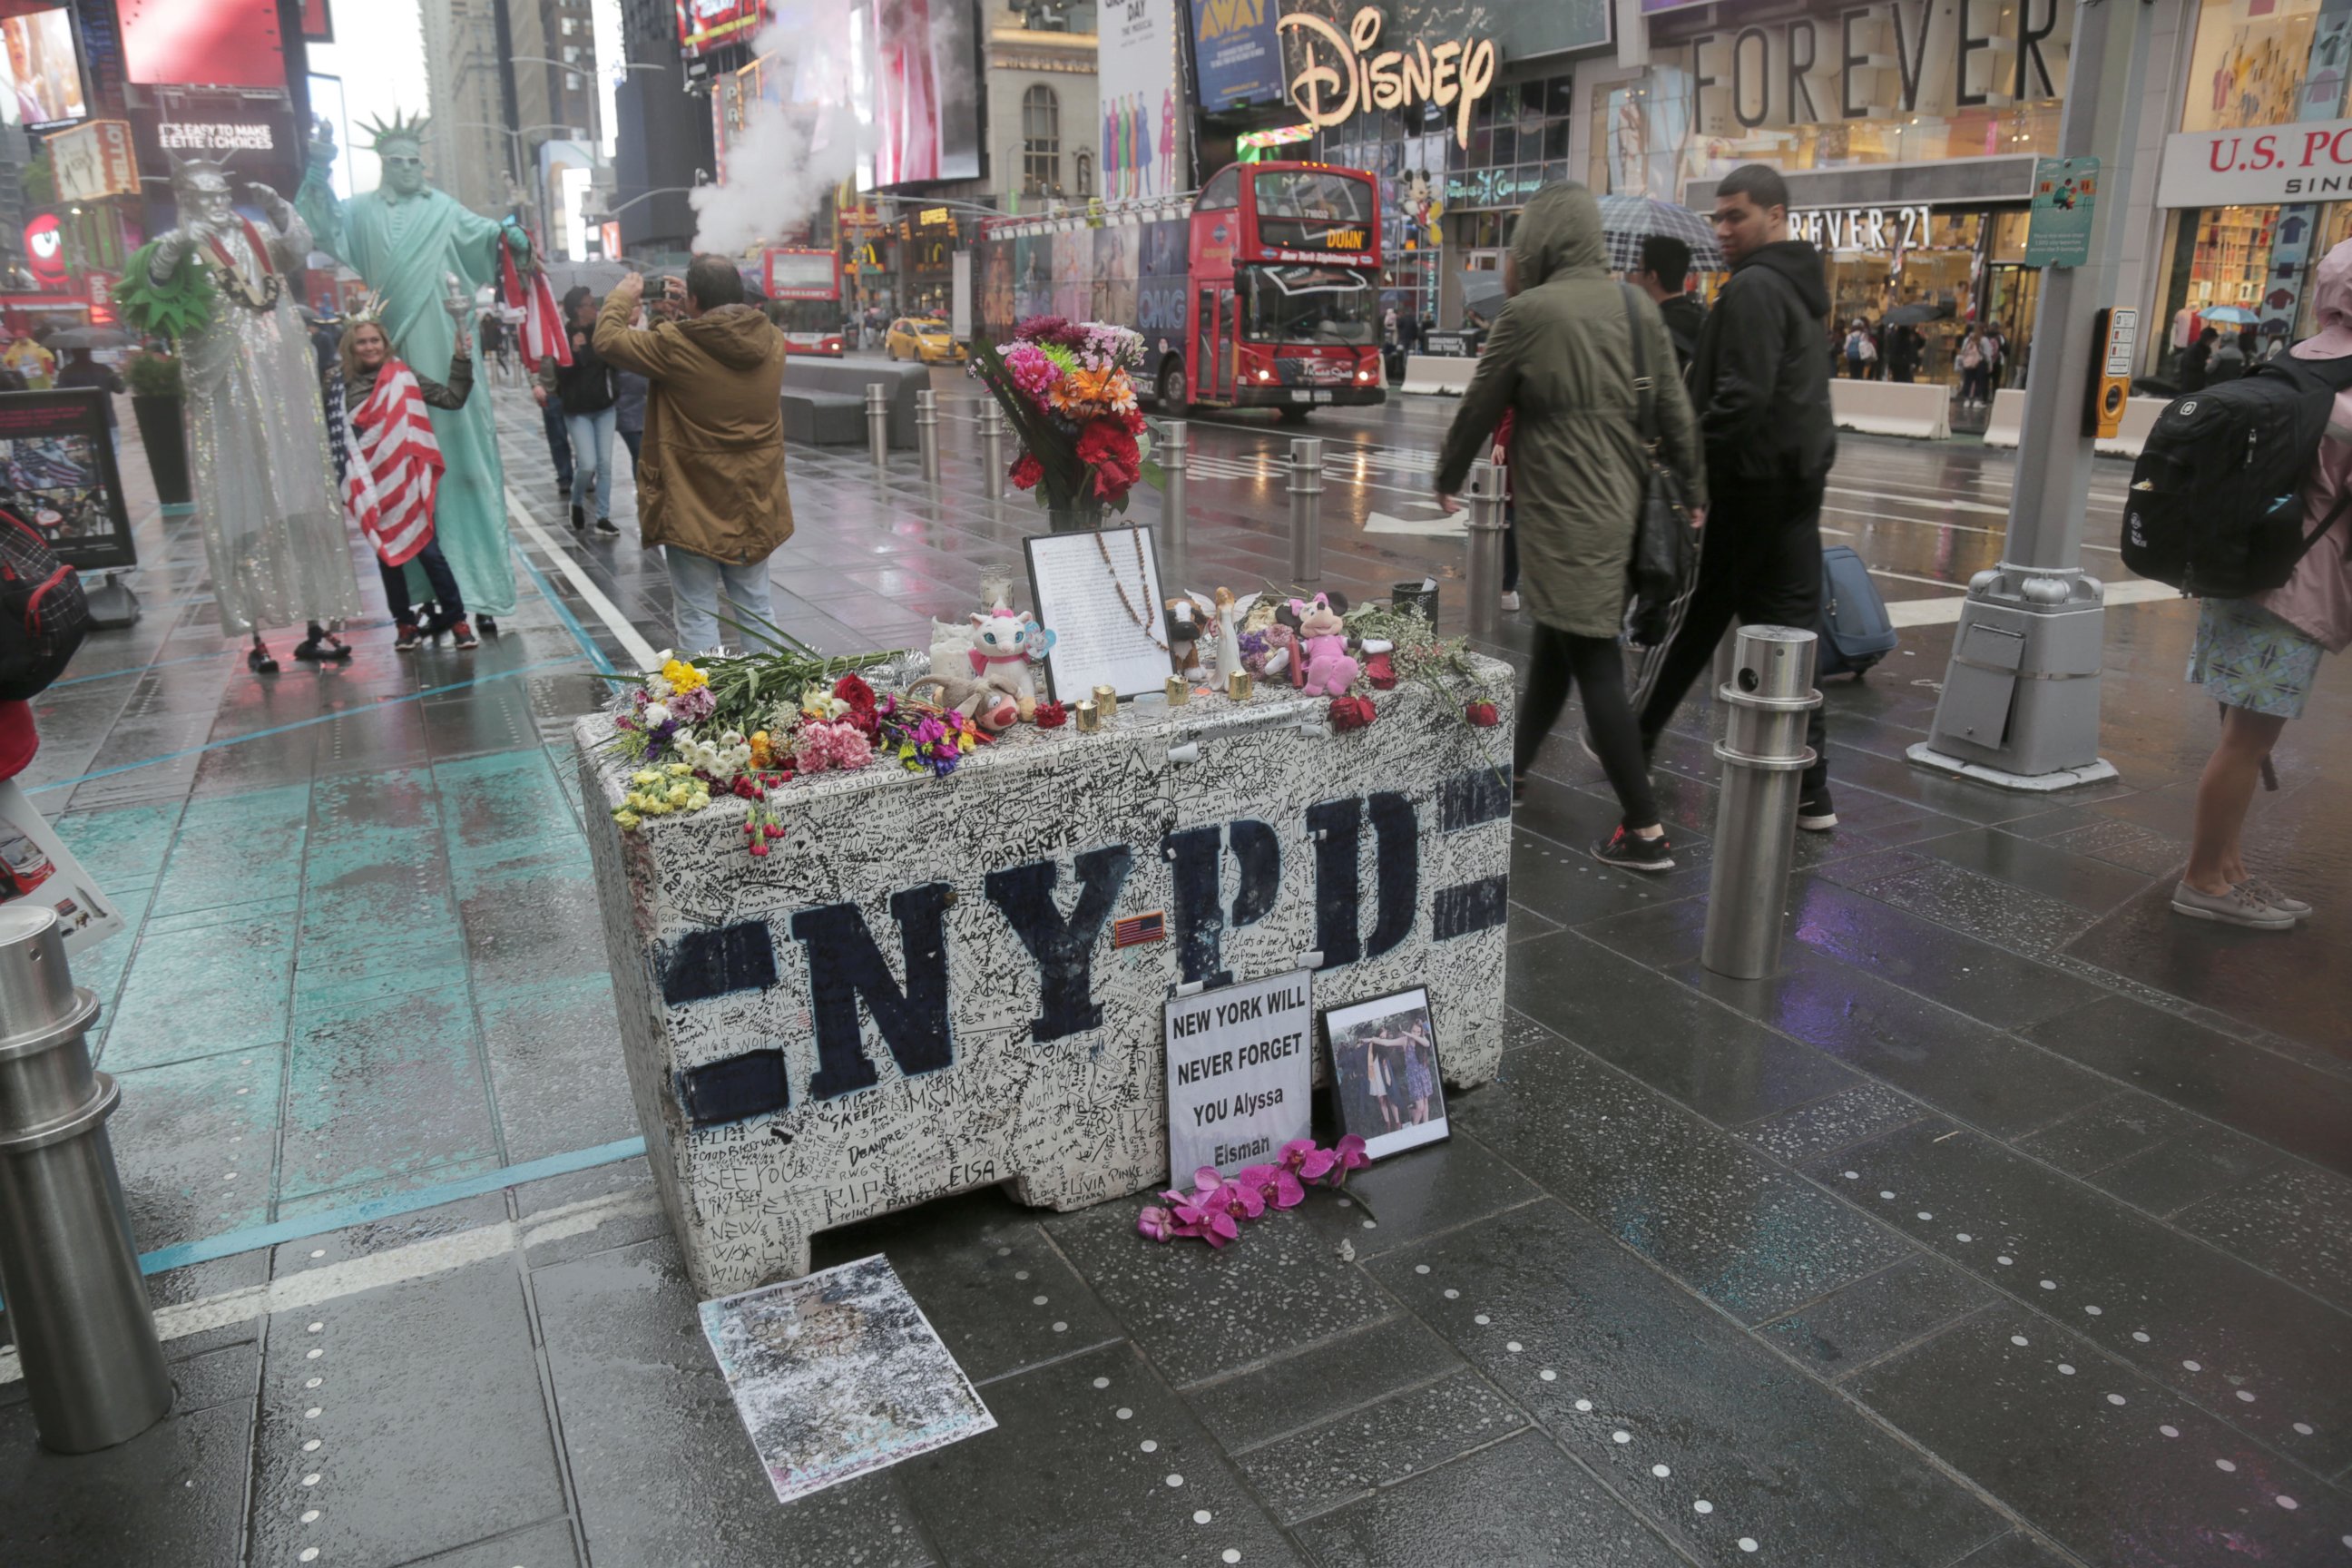 PHOTO: Thomas Elsman left a letter at the memorial of his daughter Alyssa, who was killed when a speeding car plowed into crowds of people in Times Square.